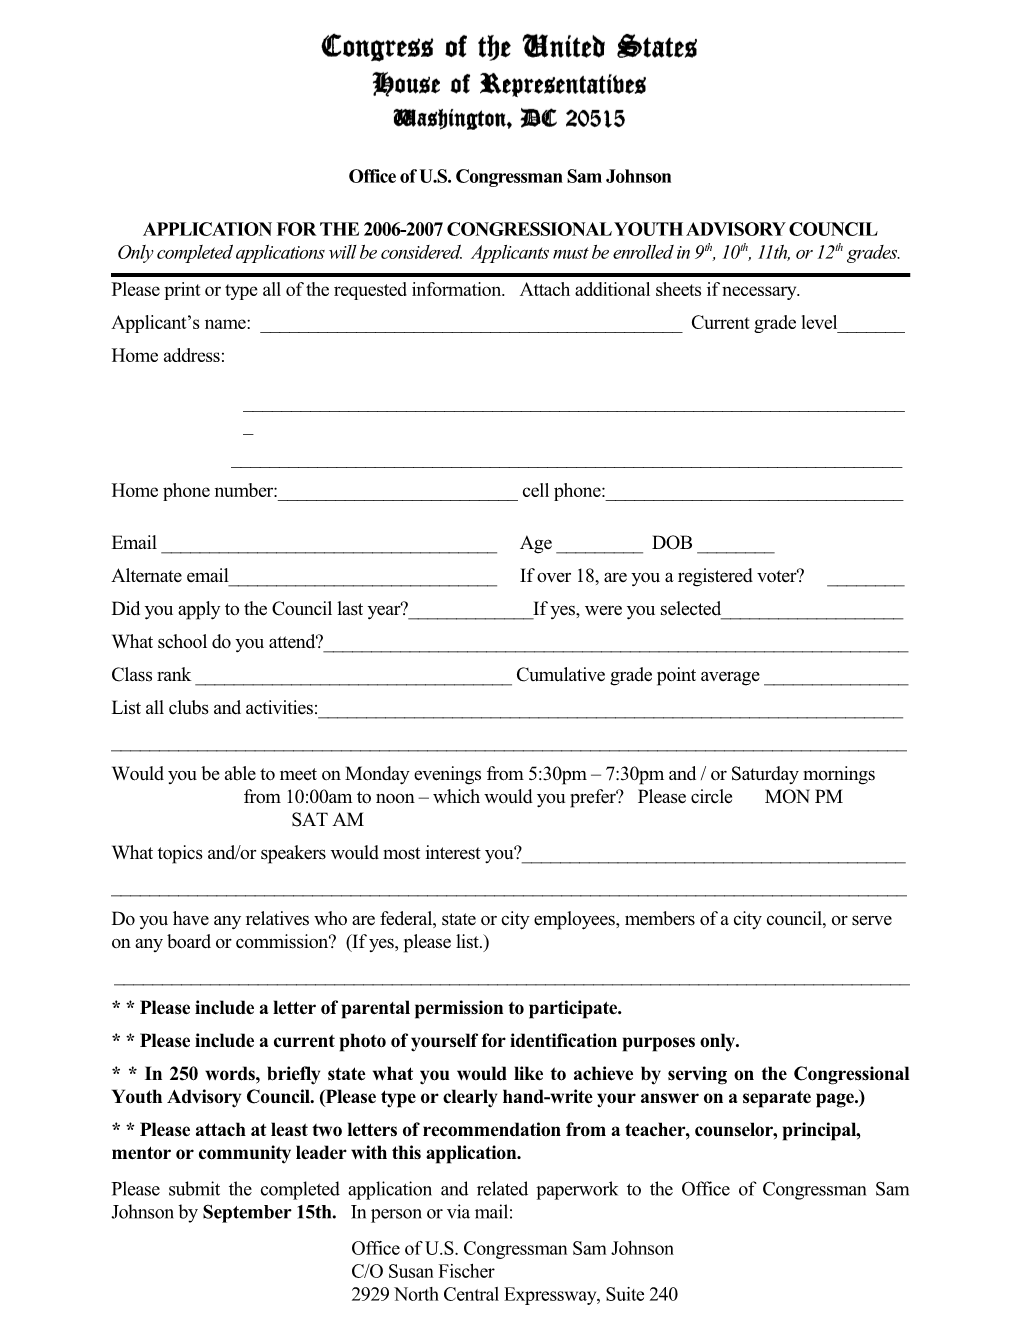 Application for the 2006-2007 Congressional Youth Advisory Council